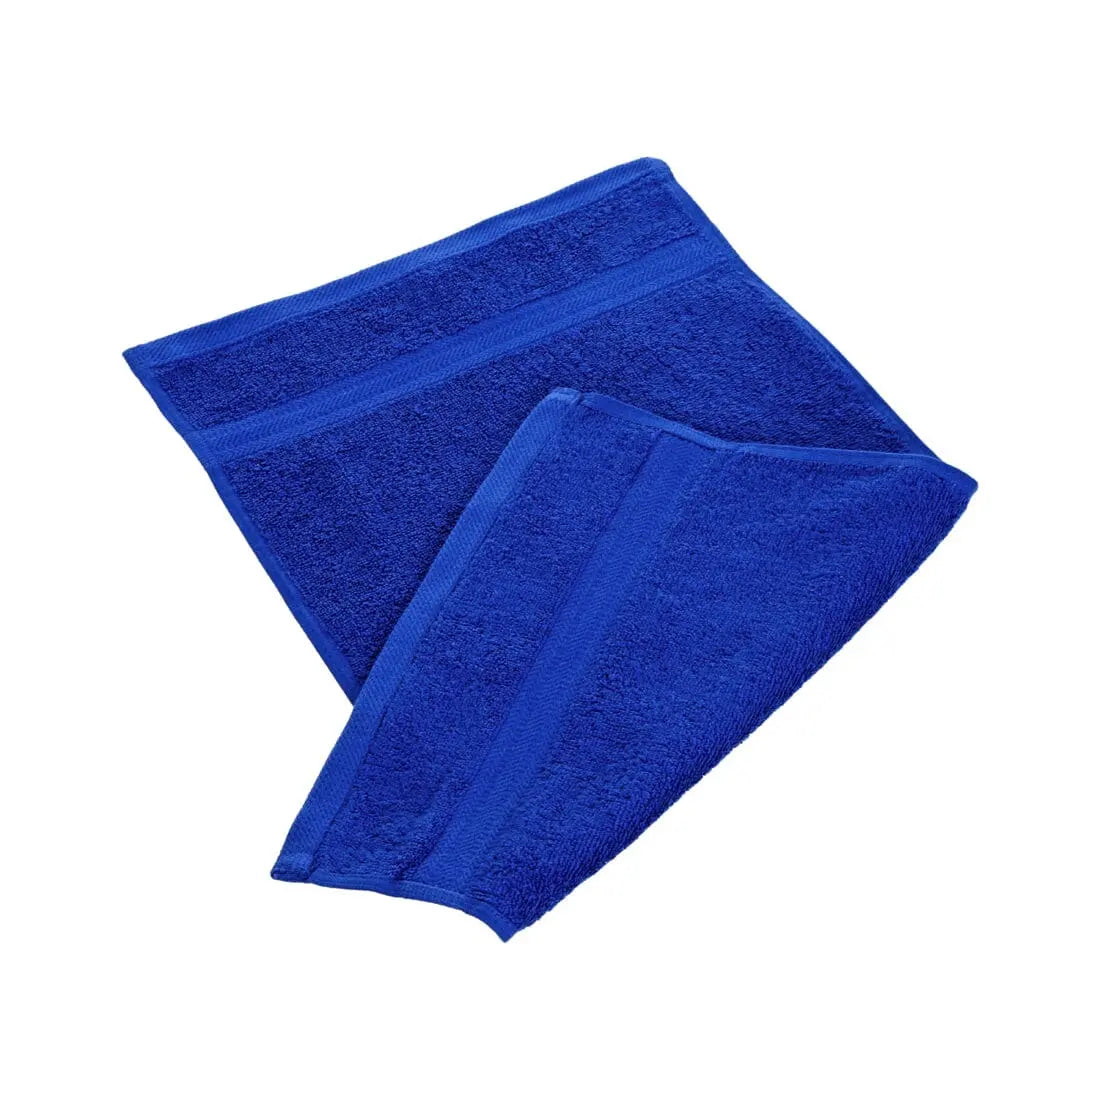 Royal egyptian cotton towel ideal for the gym